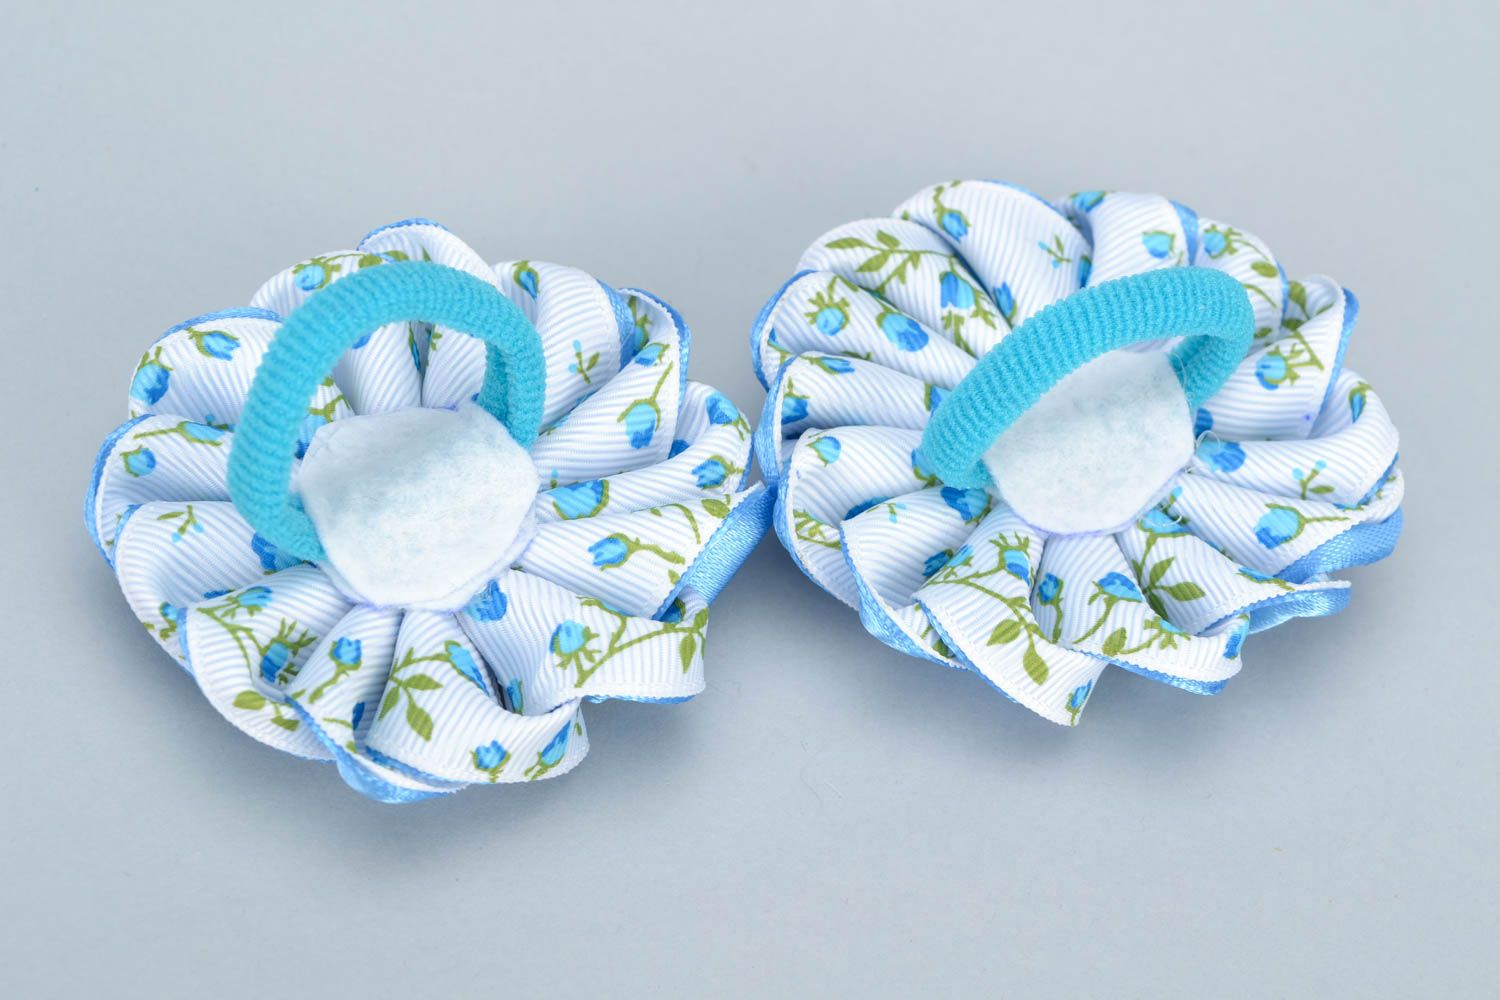 Handmade beautiful scrunchies with flowers made using kanzashi technique set of 2 pieces photo 4